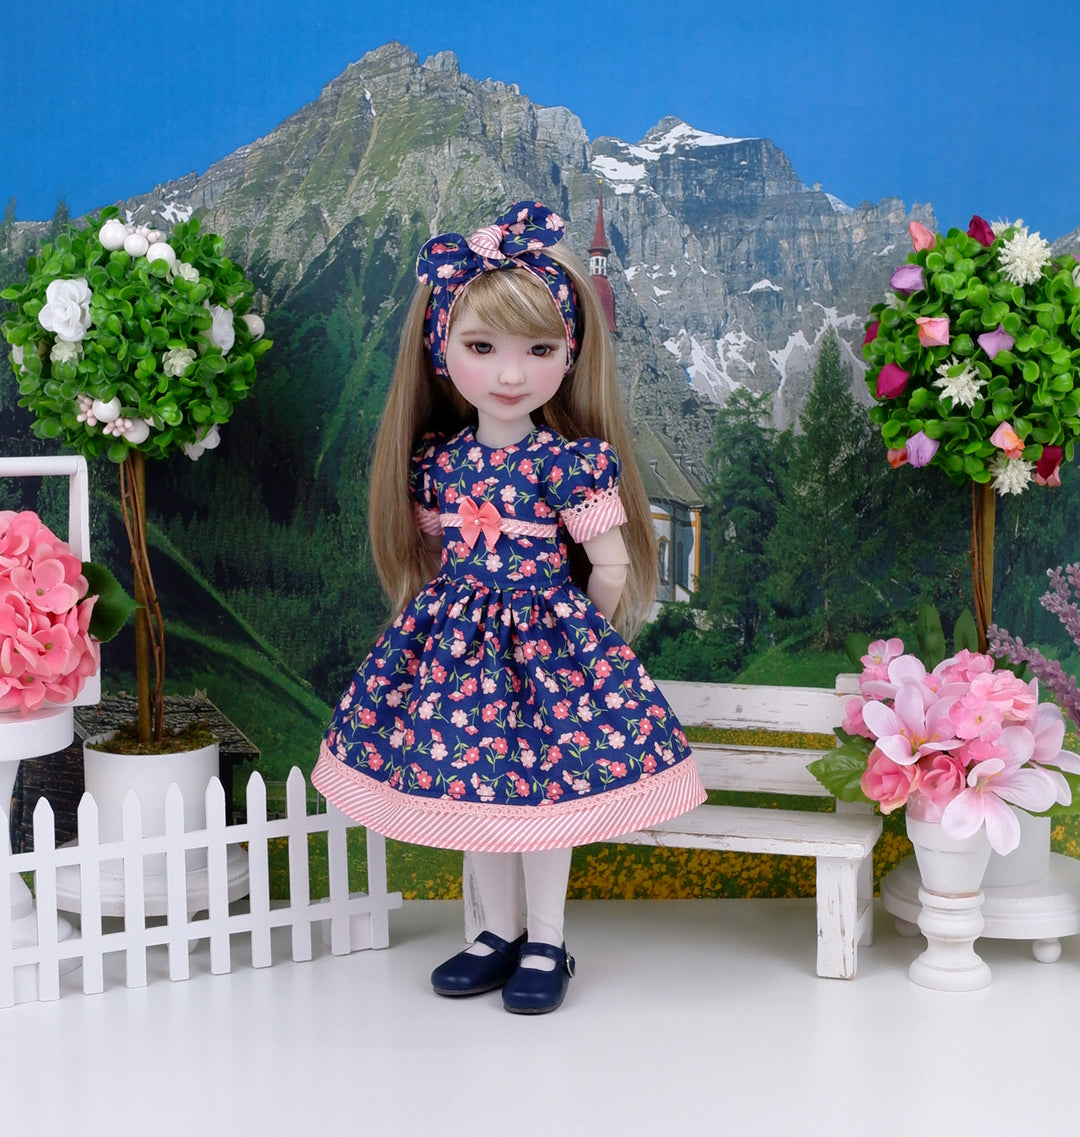 May Blooms - dress and shoes for Ruby Red Fashion Friends doll